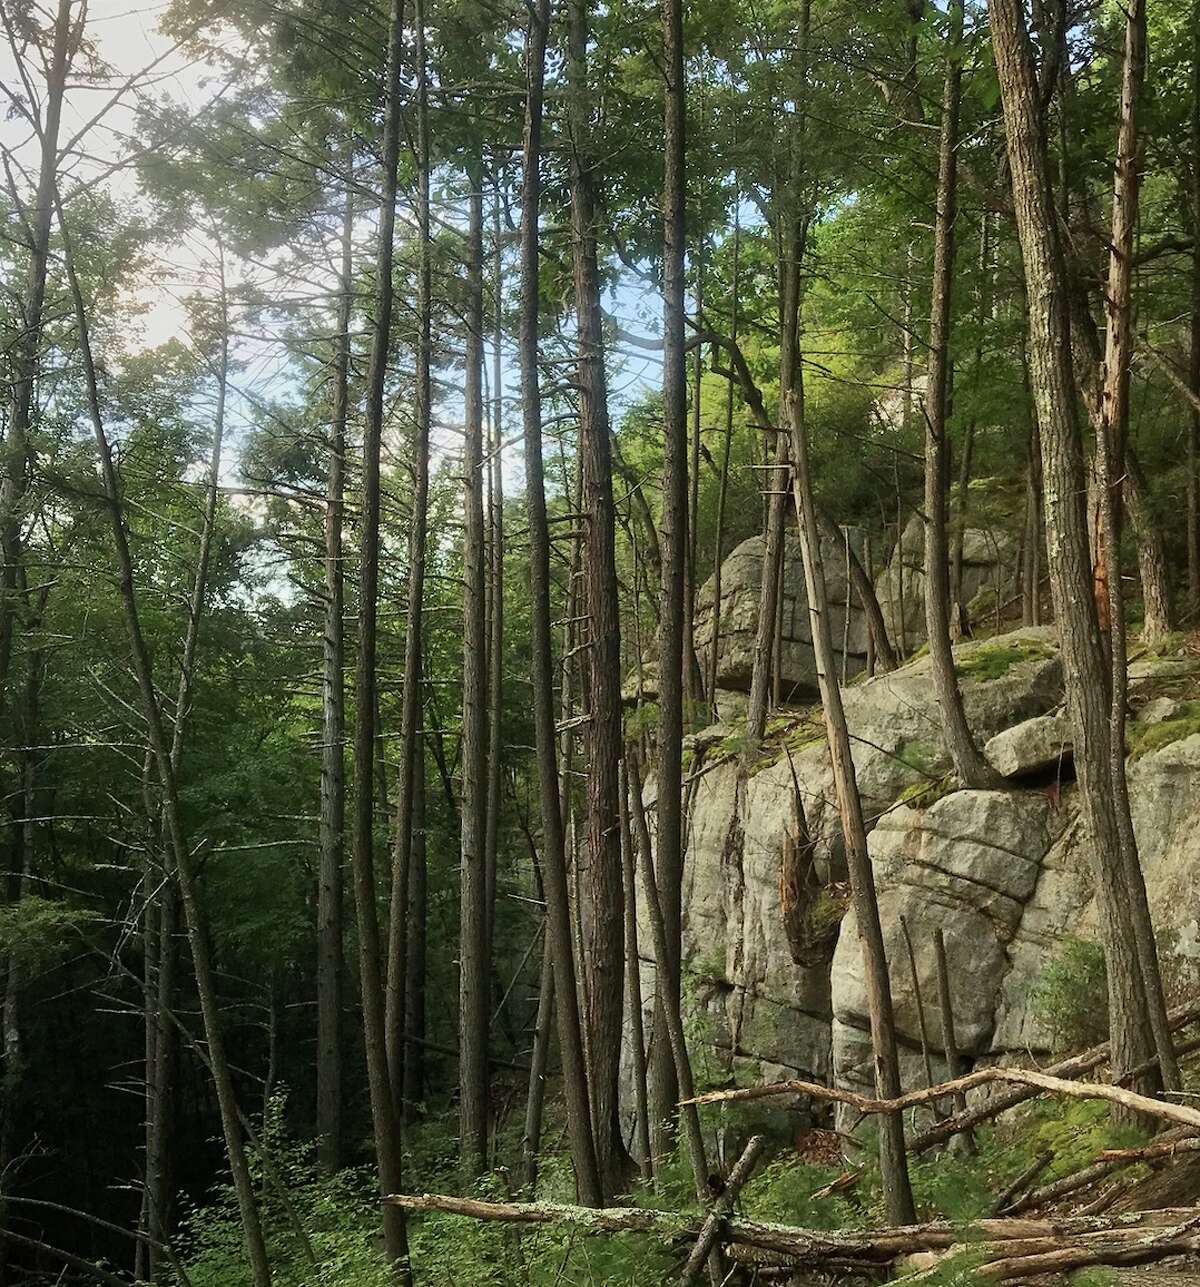 Protection of the Shawangunk Ridge ranked among residents’ top priorities. This year, 71 acres of the Ridge were purchased to be protected by Mohonk Preserve and The Shawangunk Conservancy.